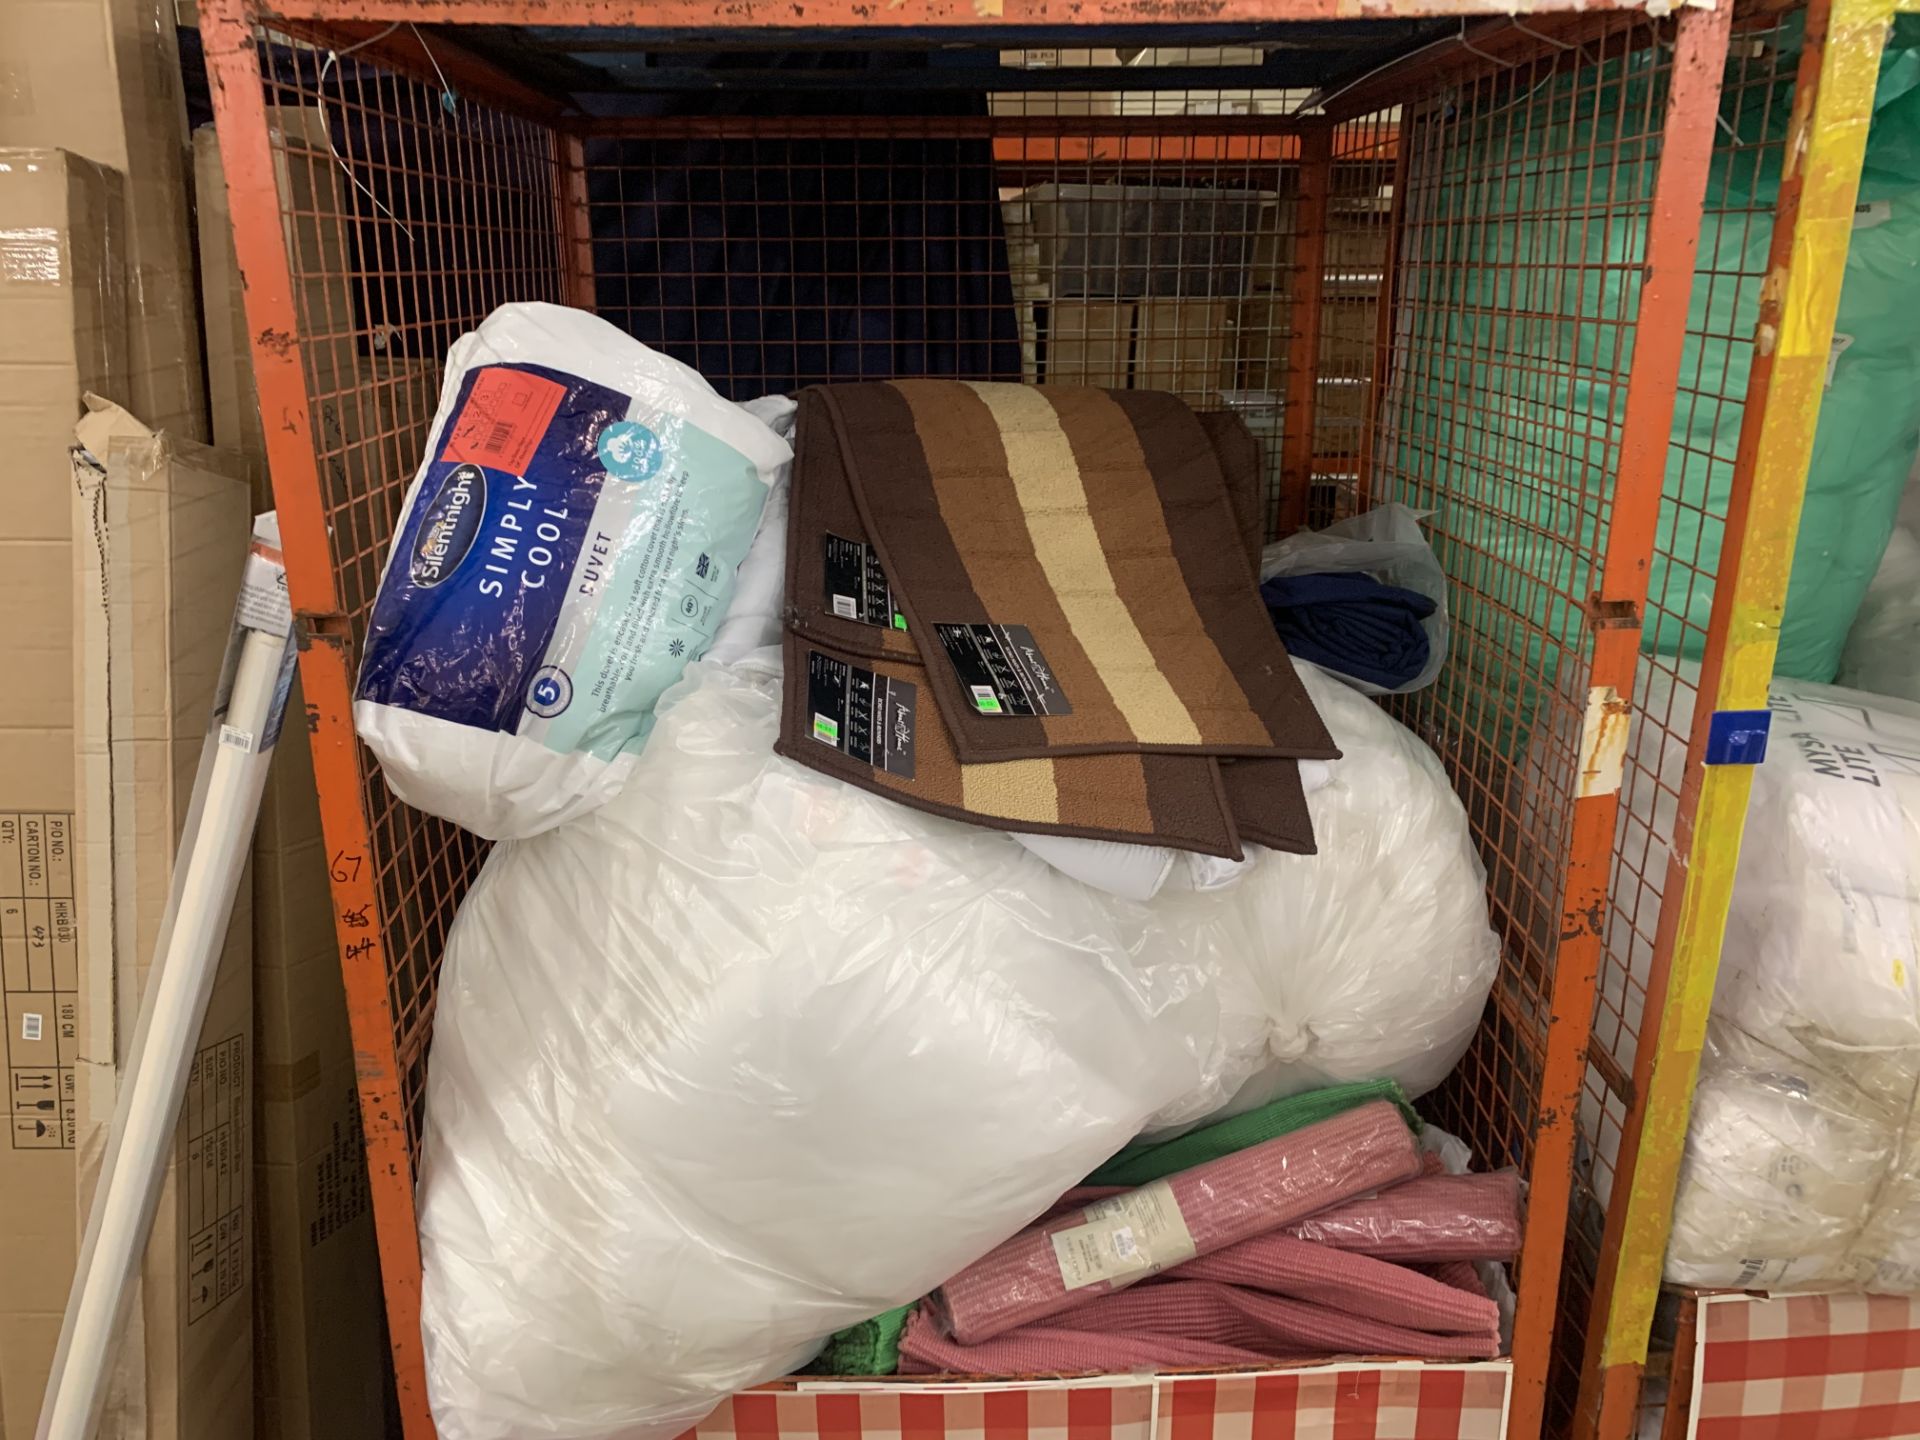 CONTENTS OF STILLAGE INCLUDING MATS, BEDDING SILENT NIGHT ETC